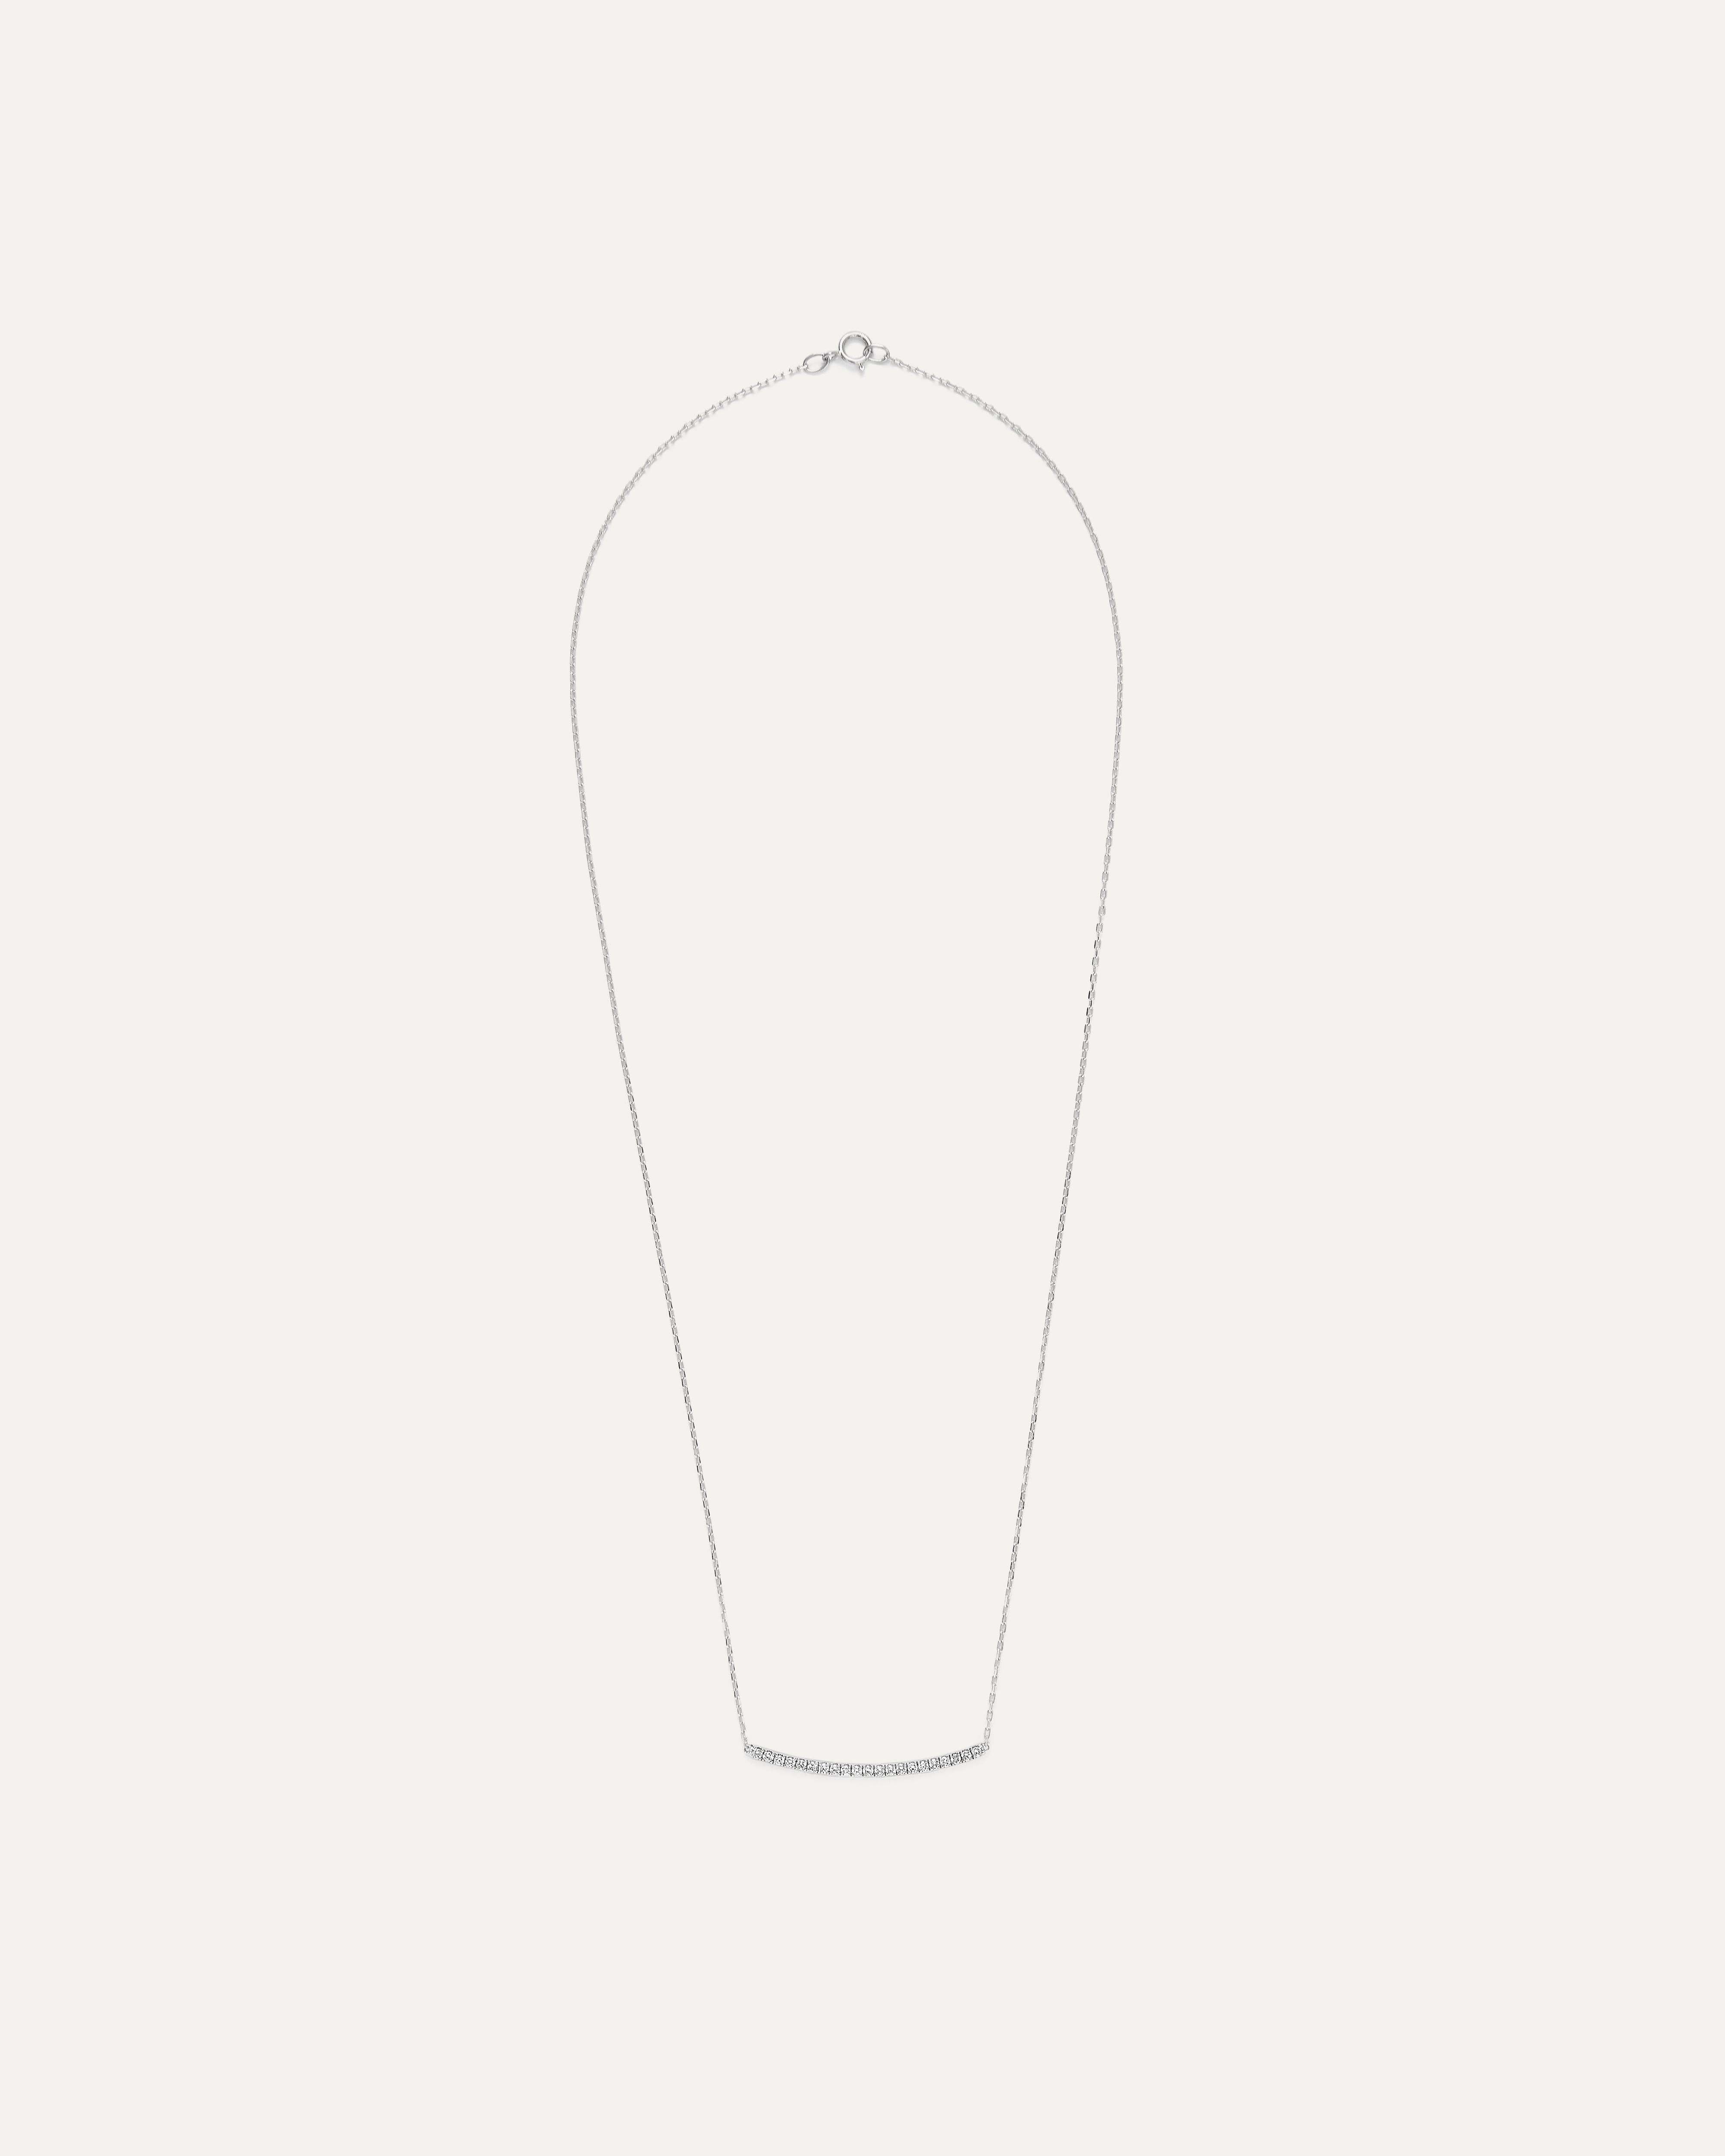 A Diamond Curve Bar Necklace is a striking and contemporary piece of jewelry that seamlessly marries elegance with modern design. This necklace features a gently curving bar, often crafted from white gold or platinum, adorned with a row of exquisite